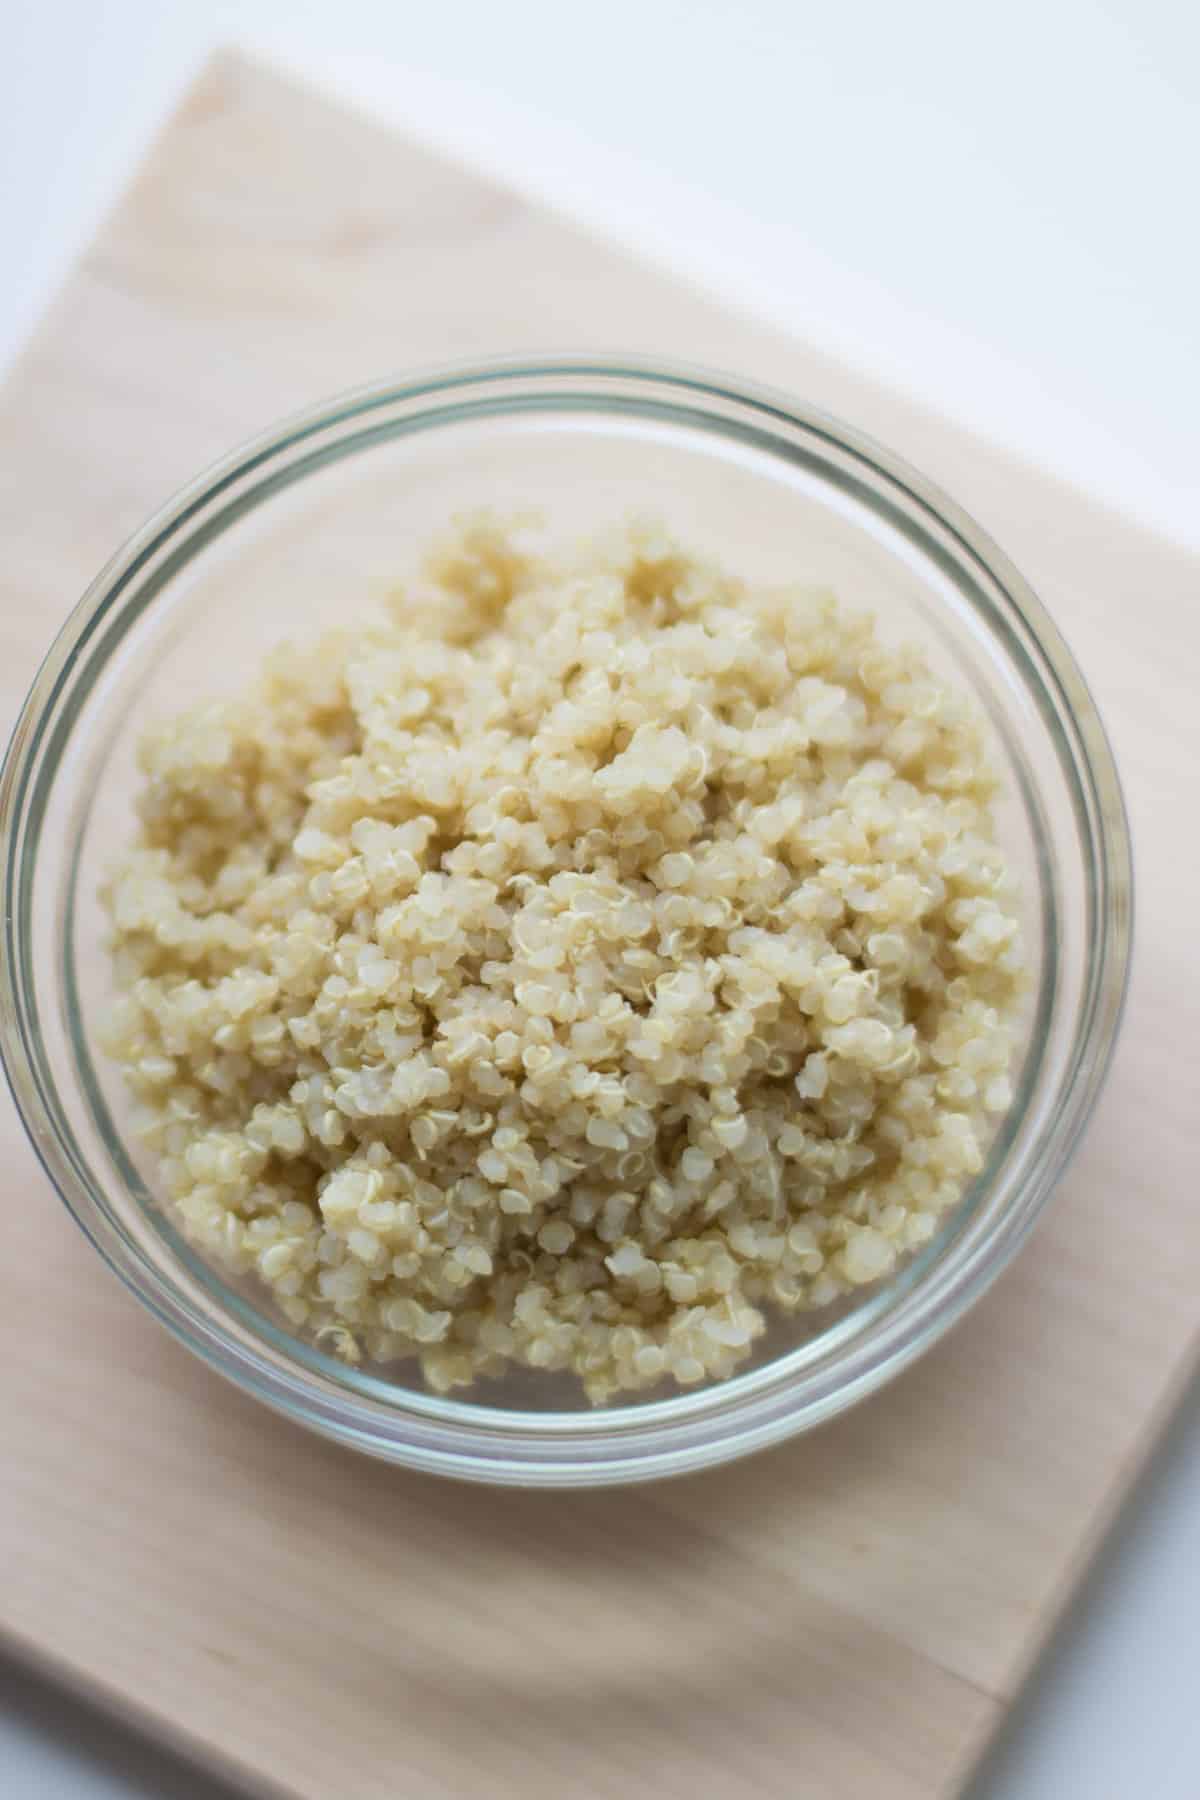 a close up shot of cooked quinoa in a glass bowl.